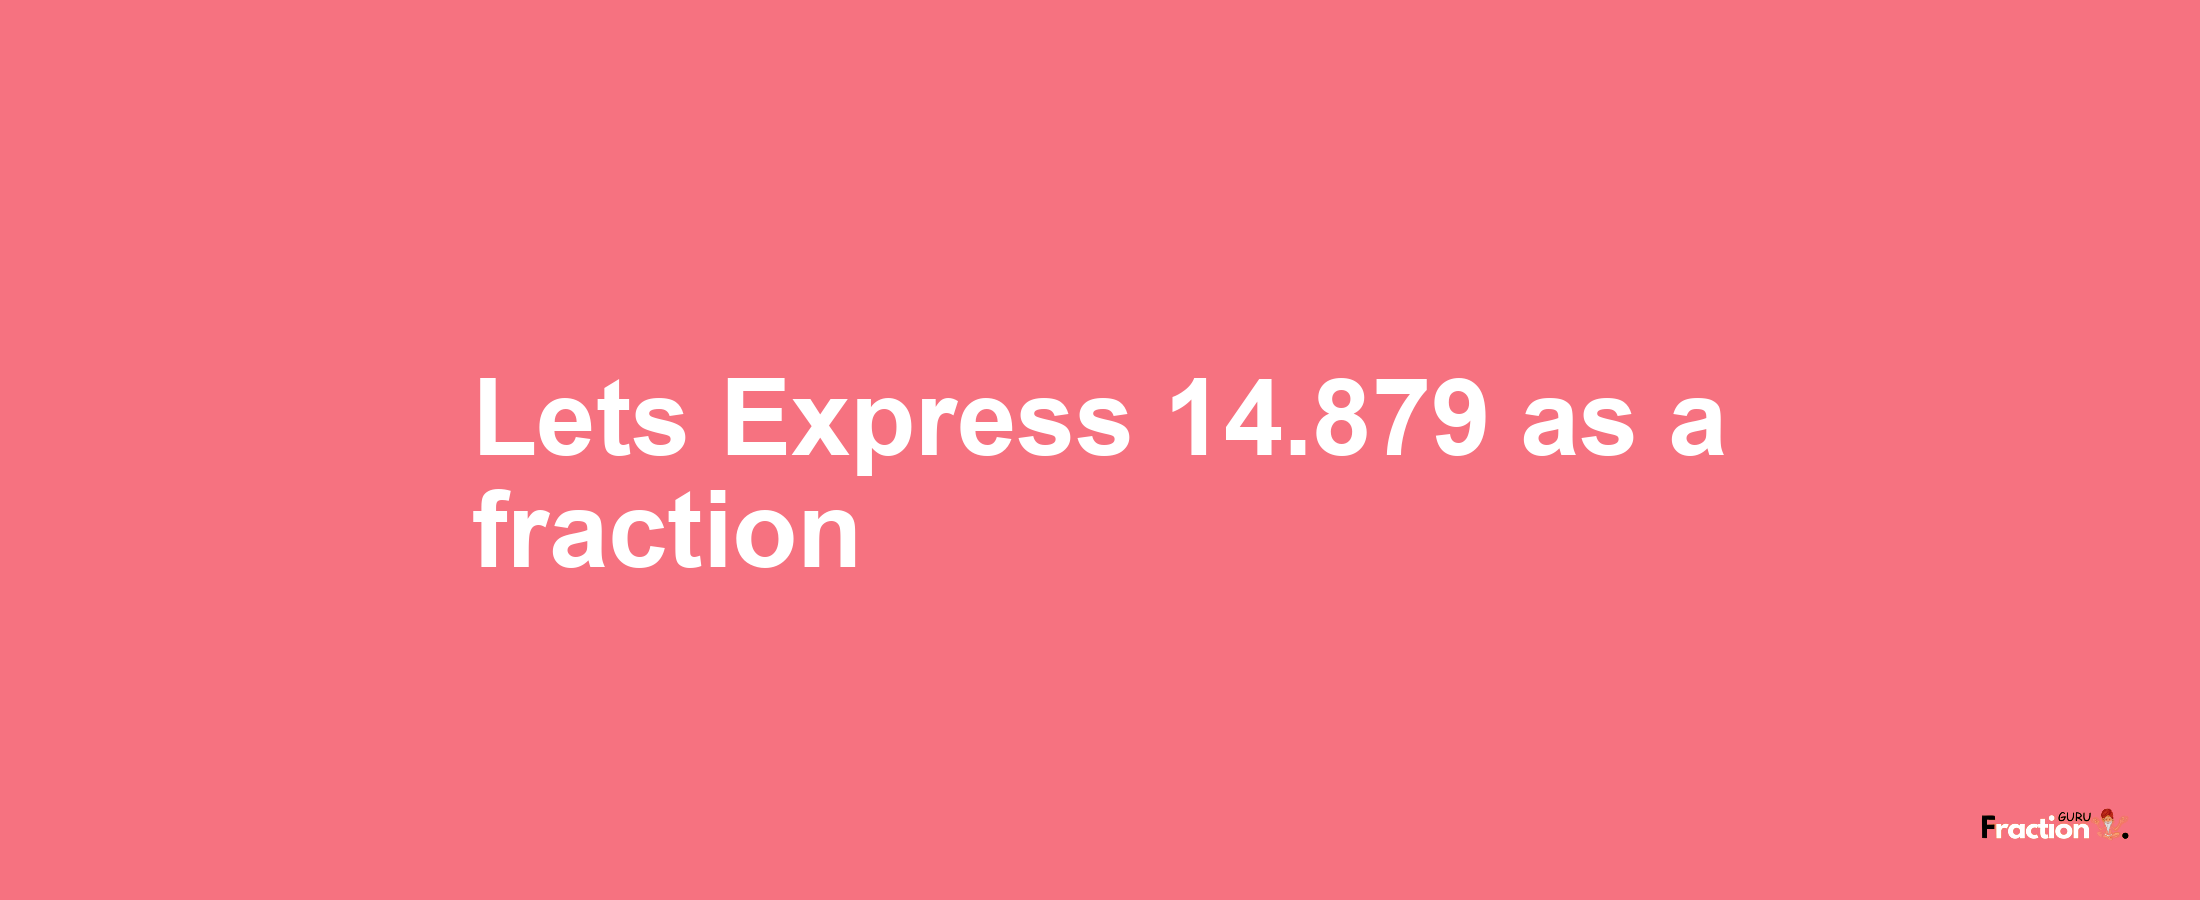 Lets Express 14.879 as afraction